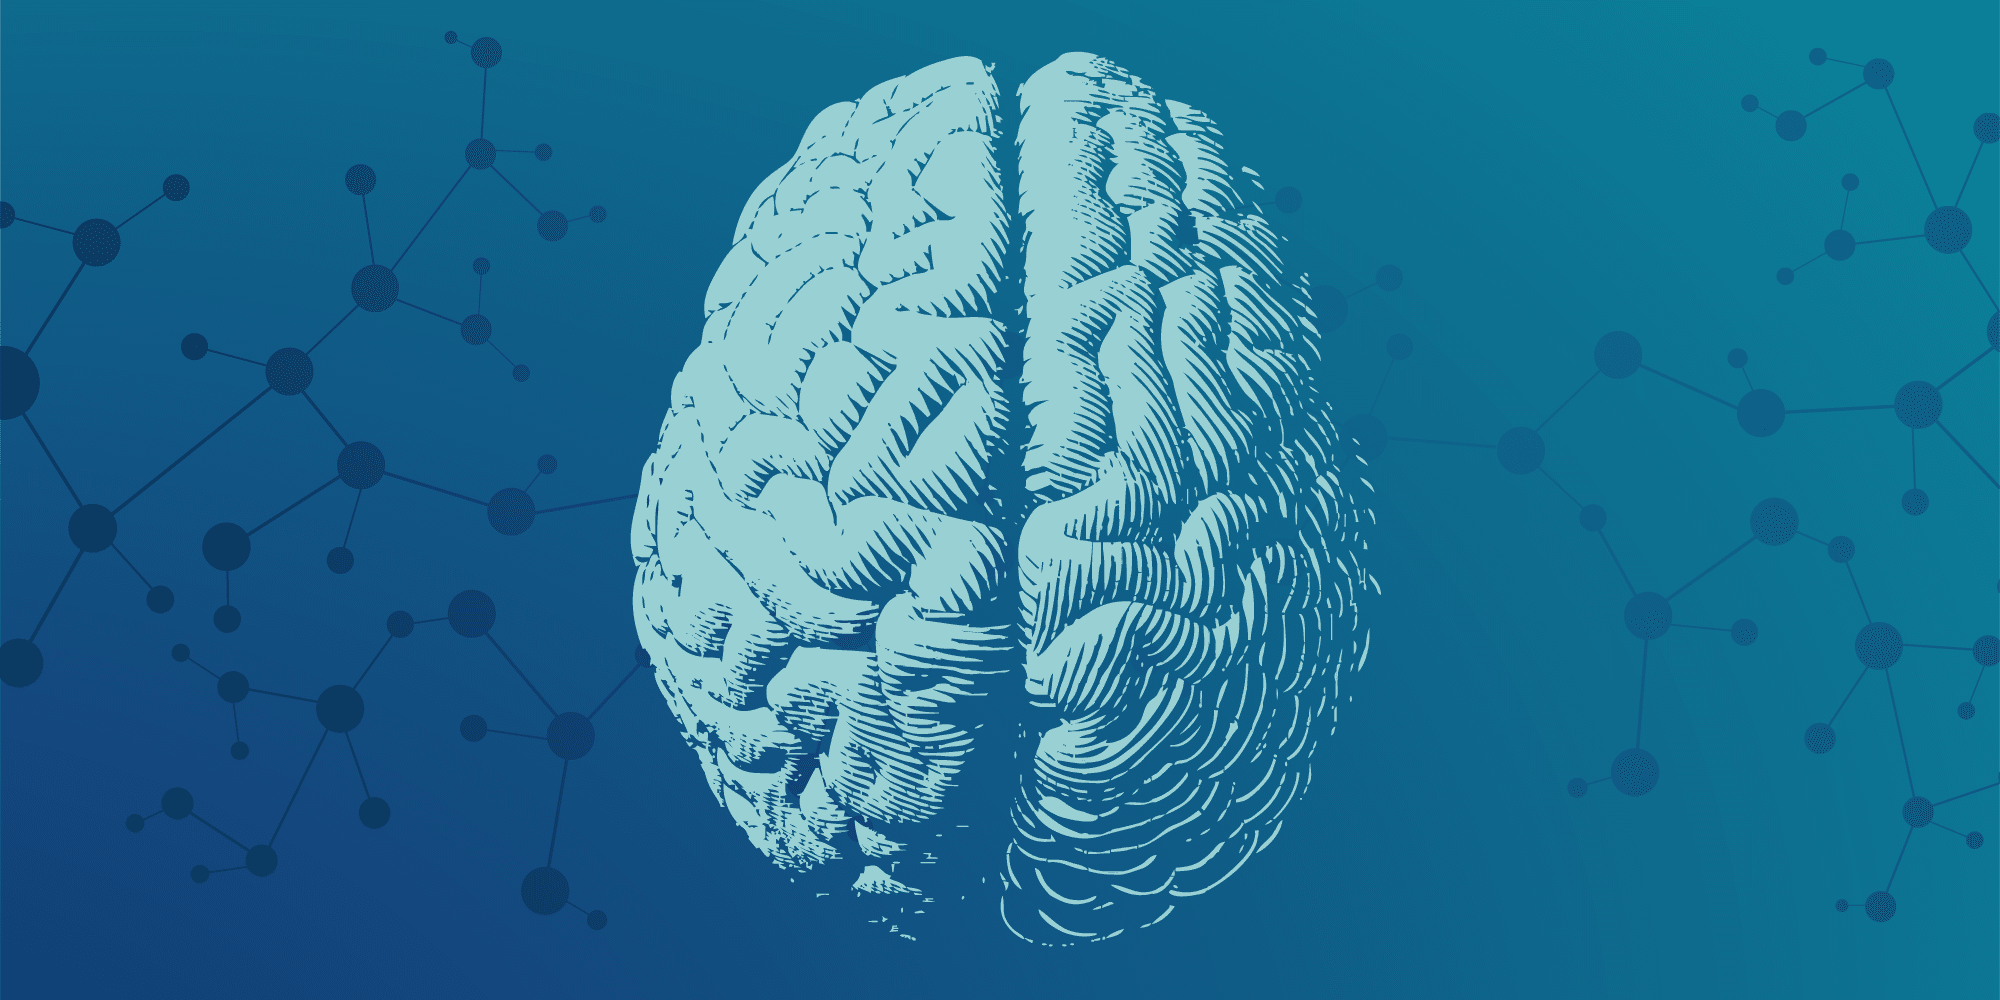 A brain image designed with the science of infographic design, set against a blue background.